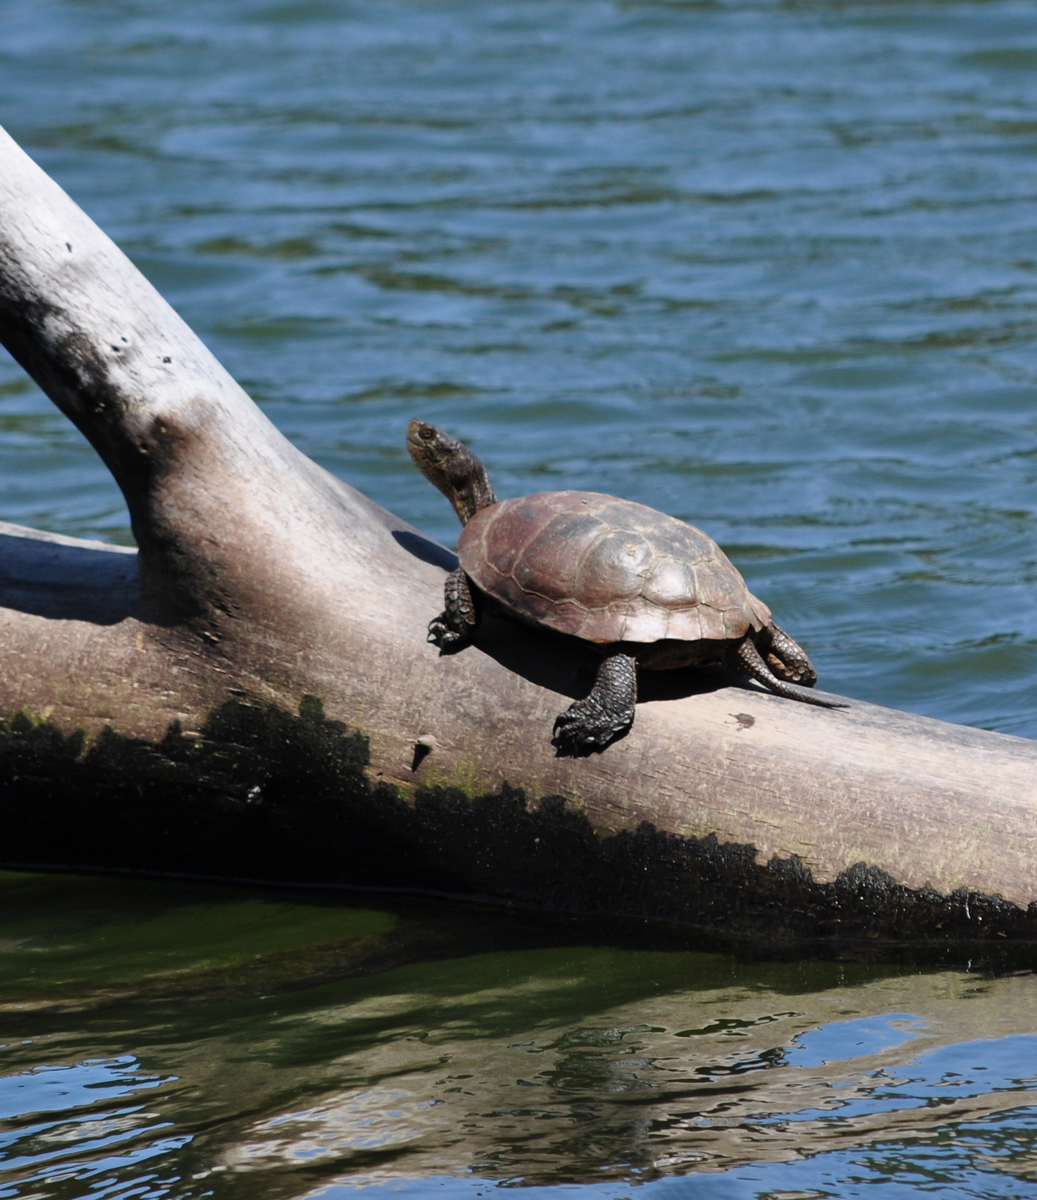 Turtle on a log in the water